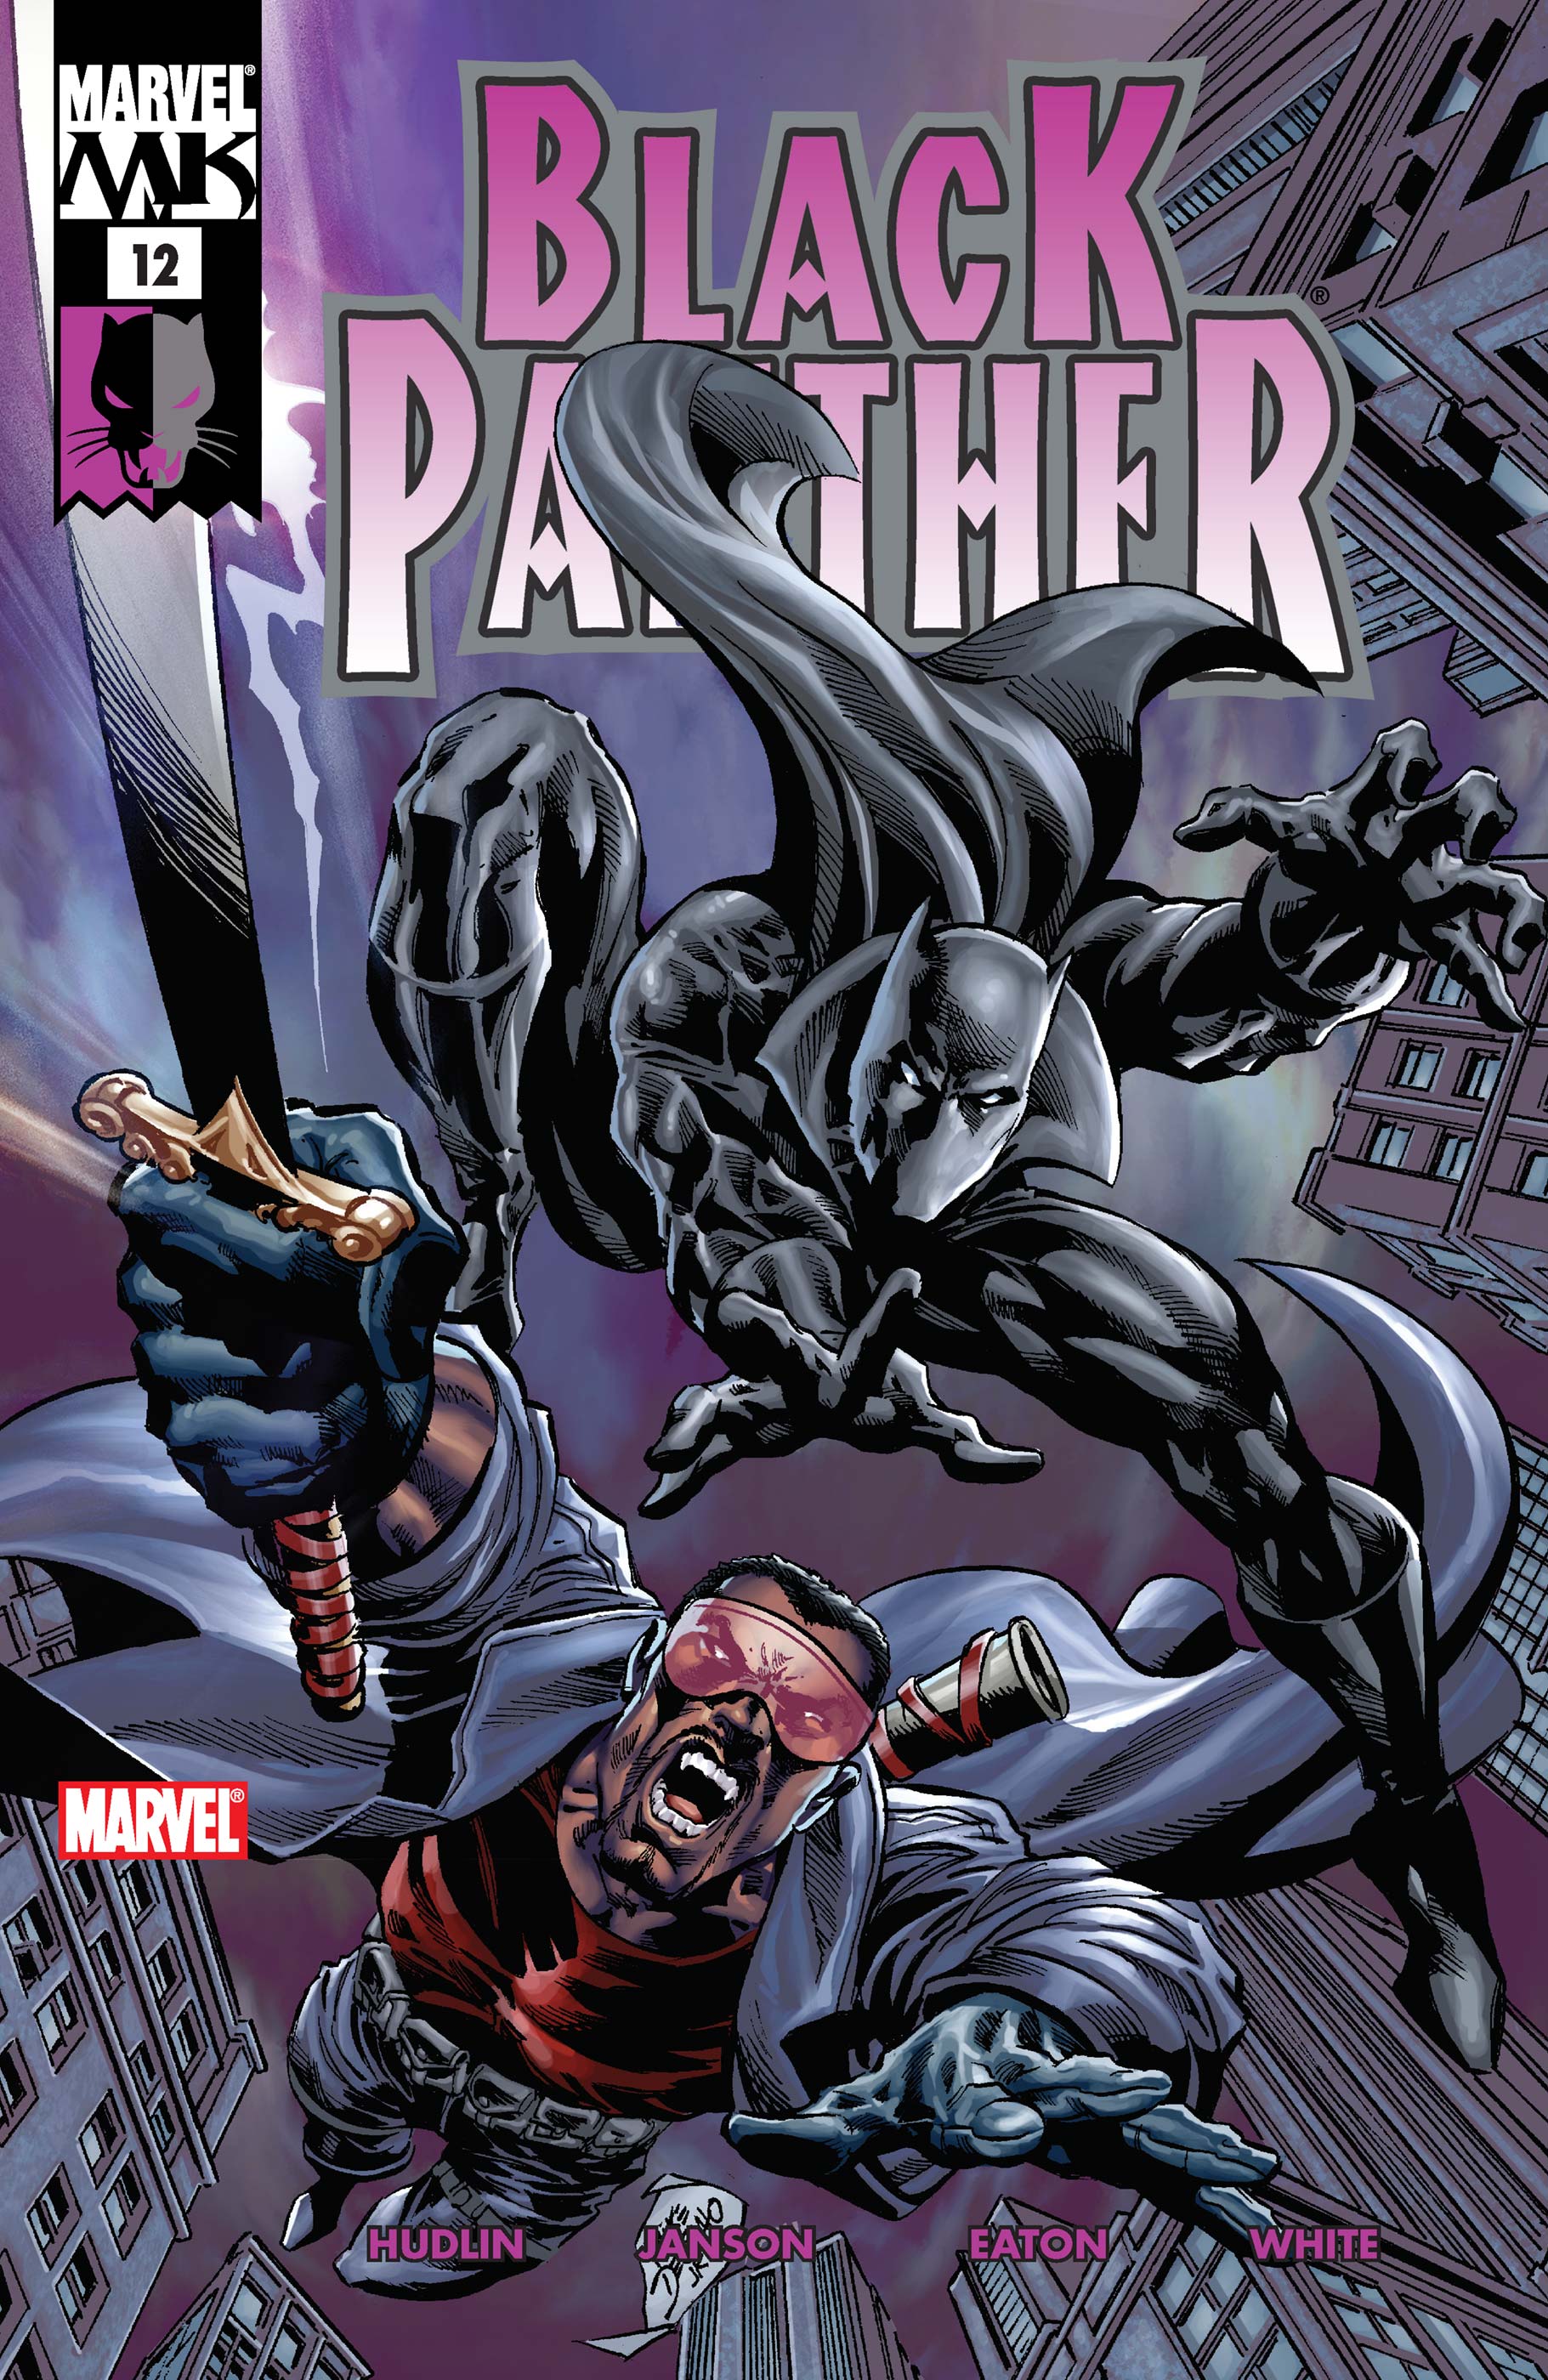 Black Panther (2005) #12 | Comic Issues | Marvel